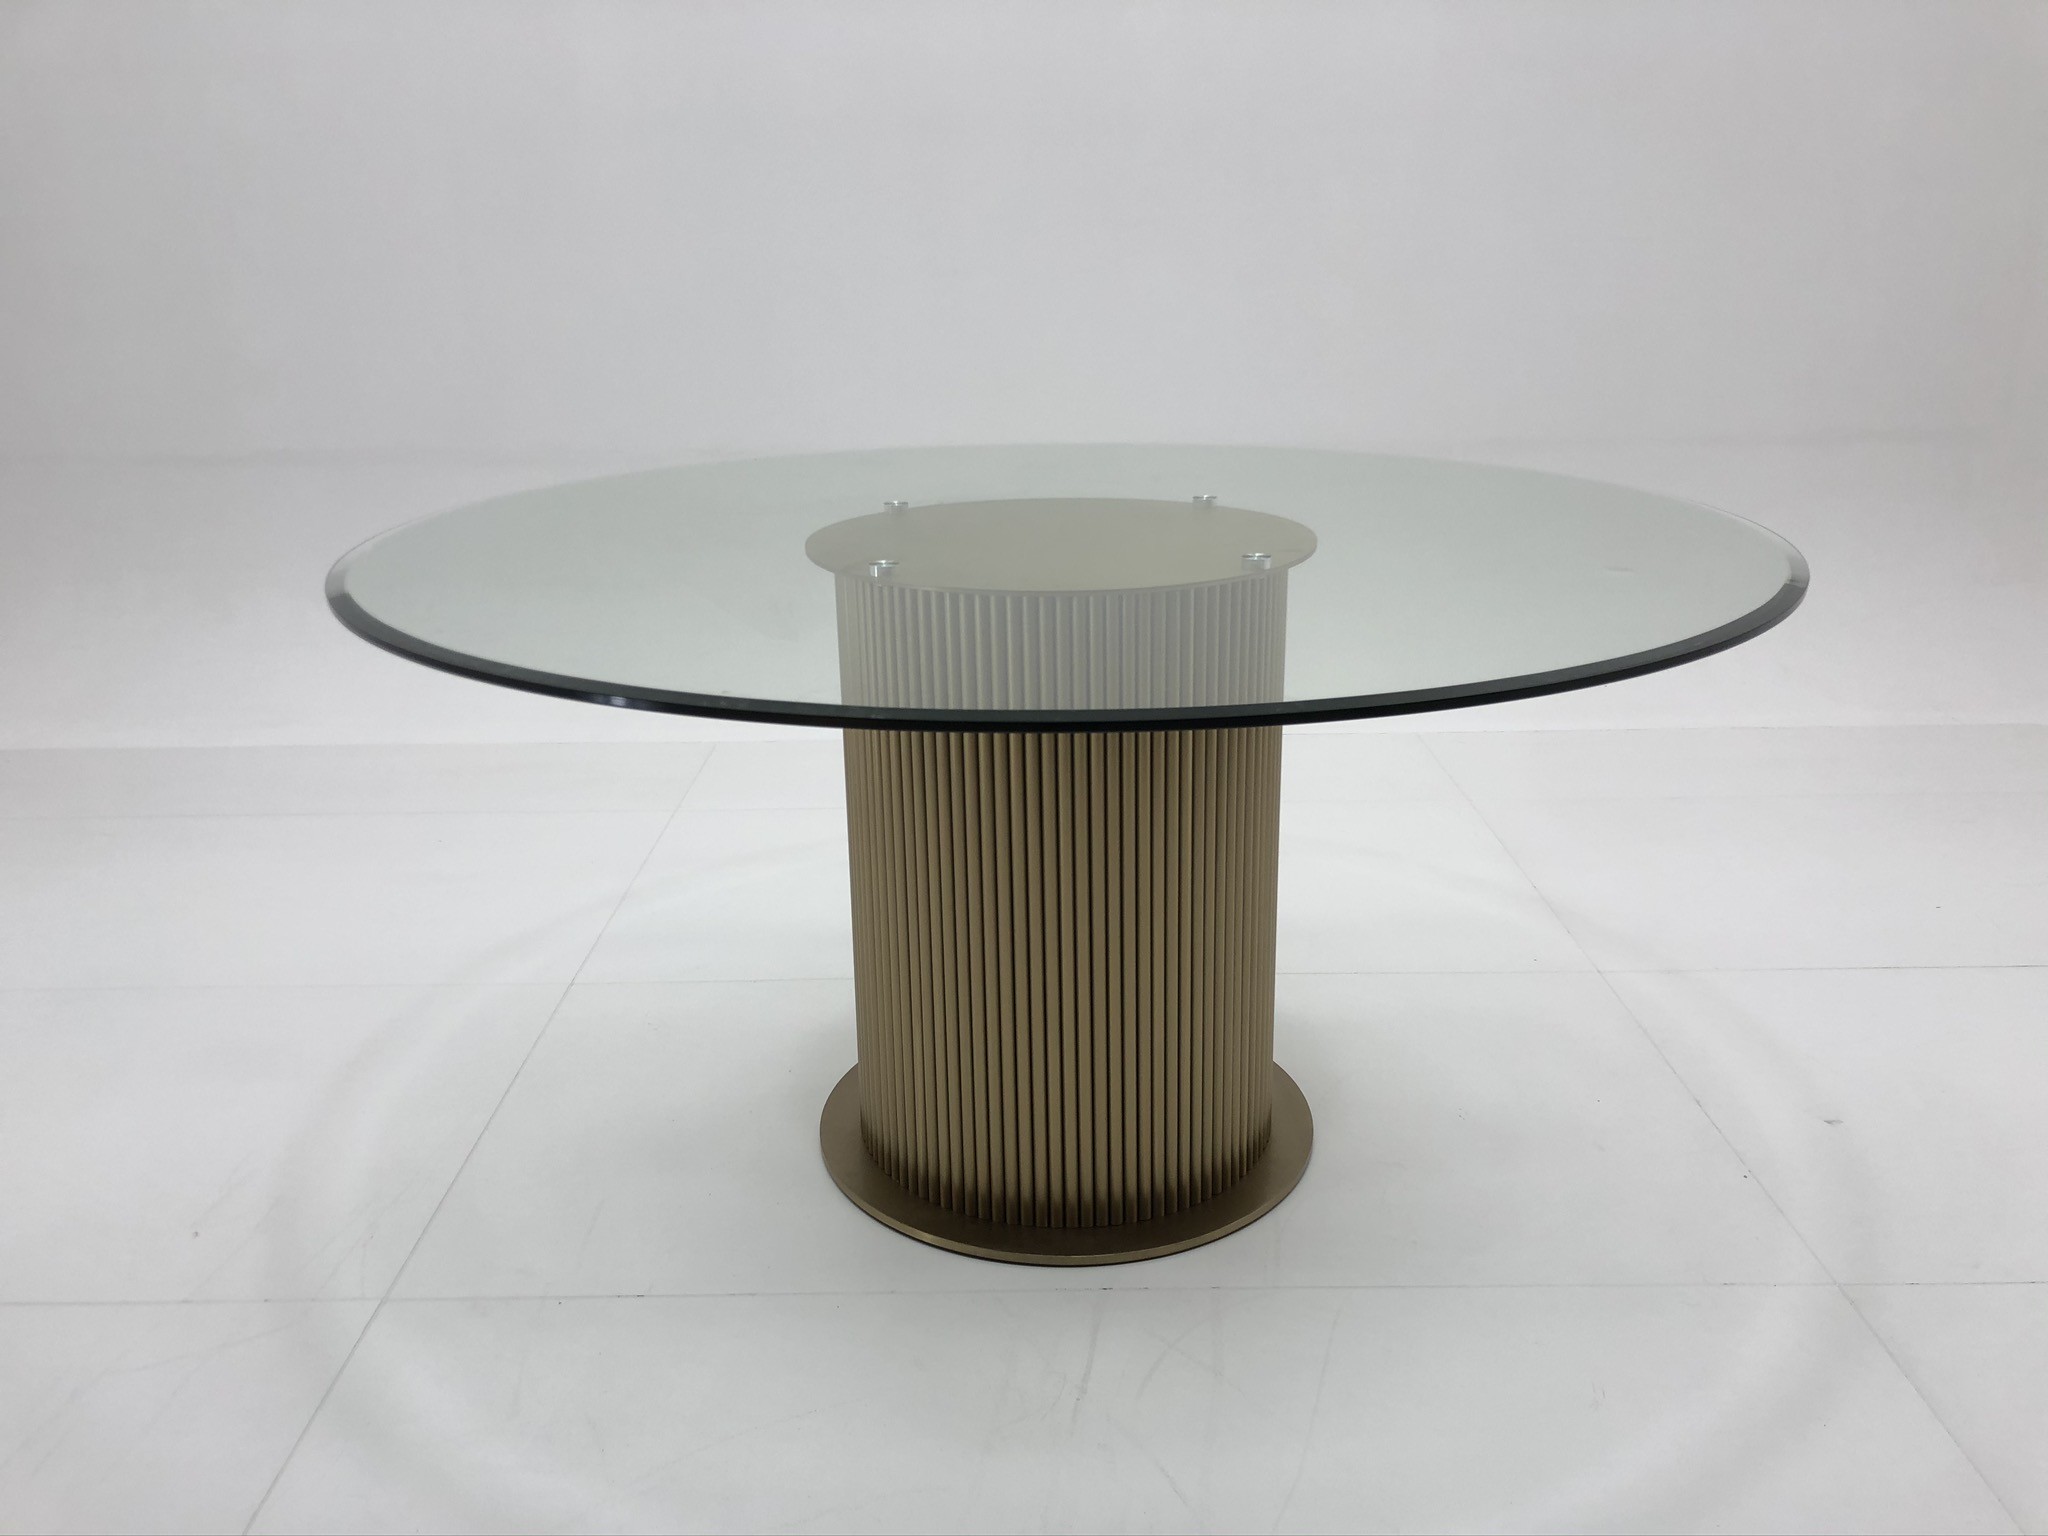 China Modern Design round glass dining table for 6 people , stainless steel leg dining room table factory